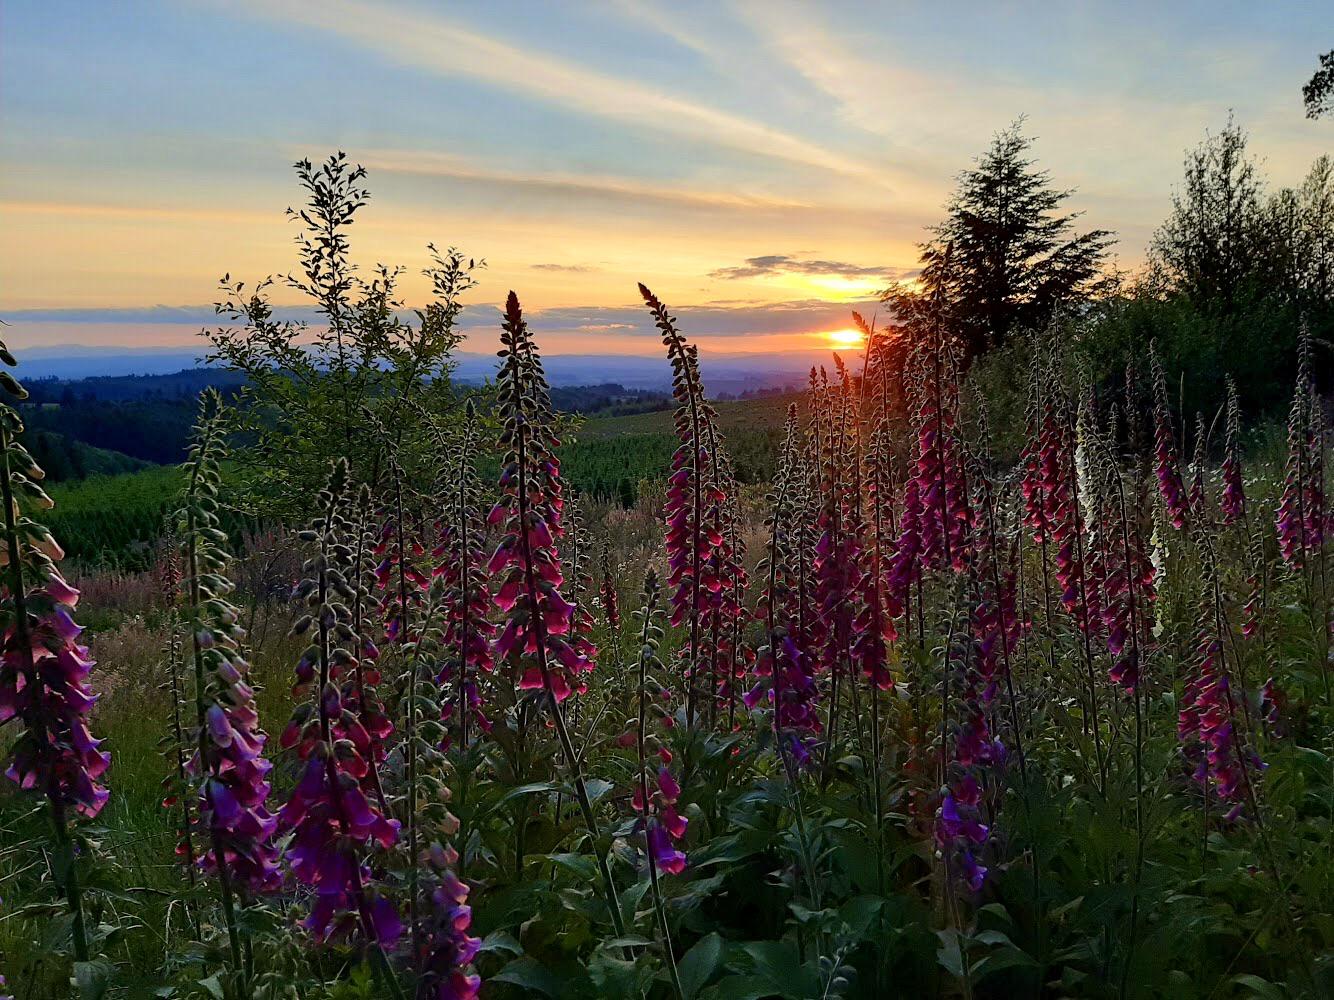 Found a field of foxglove outside the some valley where they mass grow pine trees for Xmas in Oregon. Everywhere I look is breathtaking.